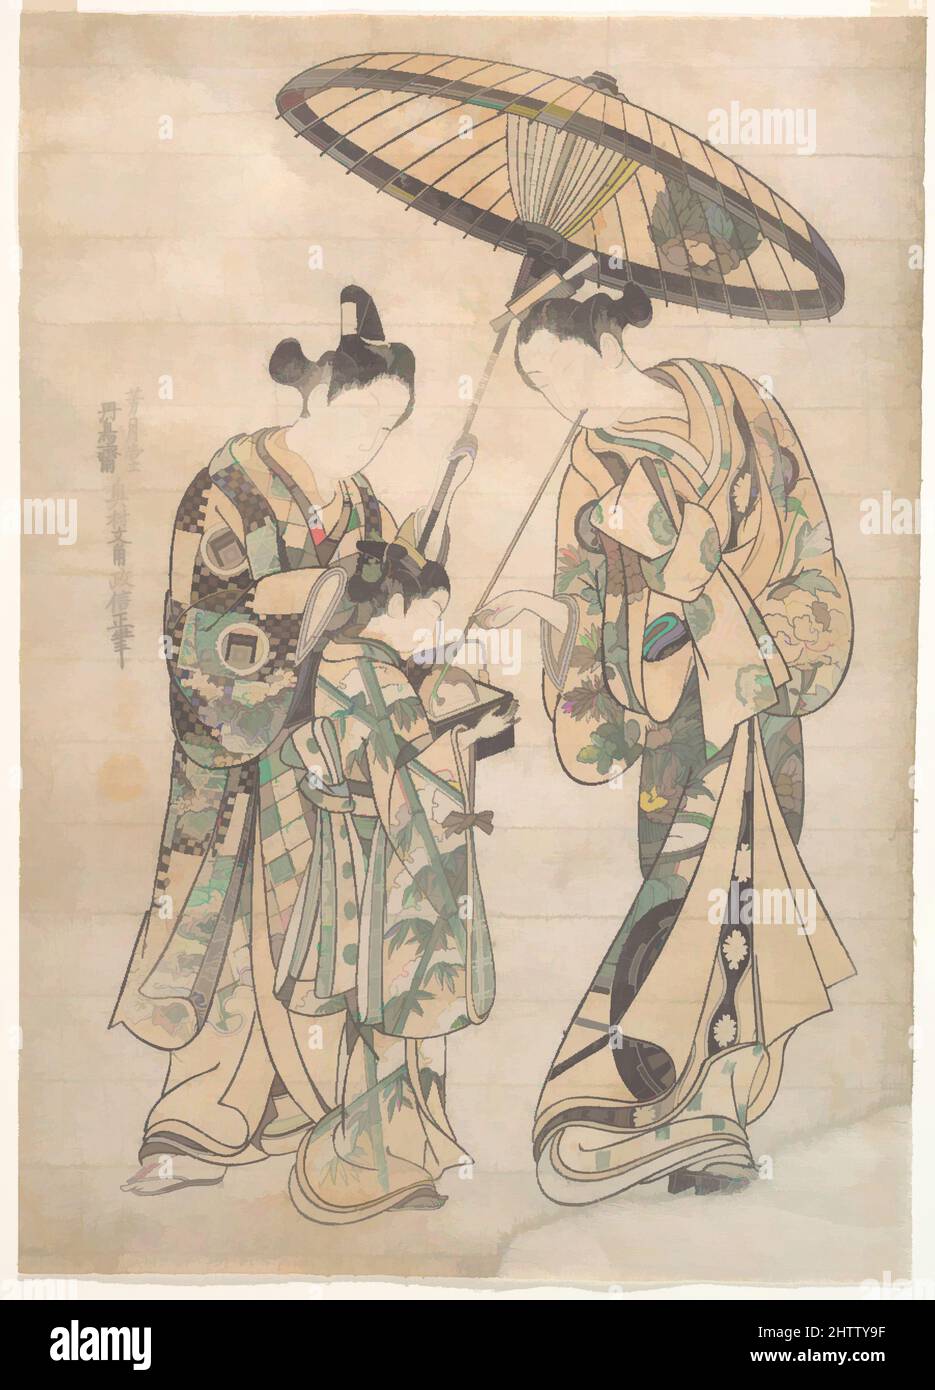 Art inspired by Two Figures, Edo period (1615–1868), Japan, Polychrome woodblock print; ink and color on paper, H. 12 1/8 in. (30.8 cm); W. 17 in. (43.2 cm), Prints, Okumura Masanobu (Japanese, 1686–1764), The invention of color block printing by the mid-eighteenth century irrevocably, Classic works modernized by Artotop with a splash of modernity. Shapes, color and value, eye-catching visual impact on art. Emotions through freedom of artworks in a contemporary way. A timeless message pursuing a wildly creative new direction. Artists turning to the digital medium and creating the Artotop NFT Stock Photo